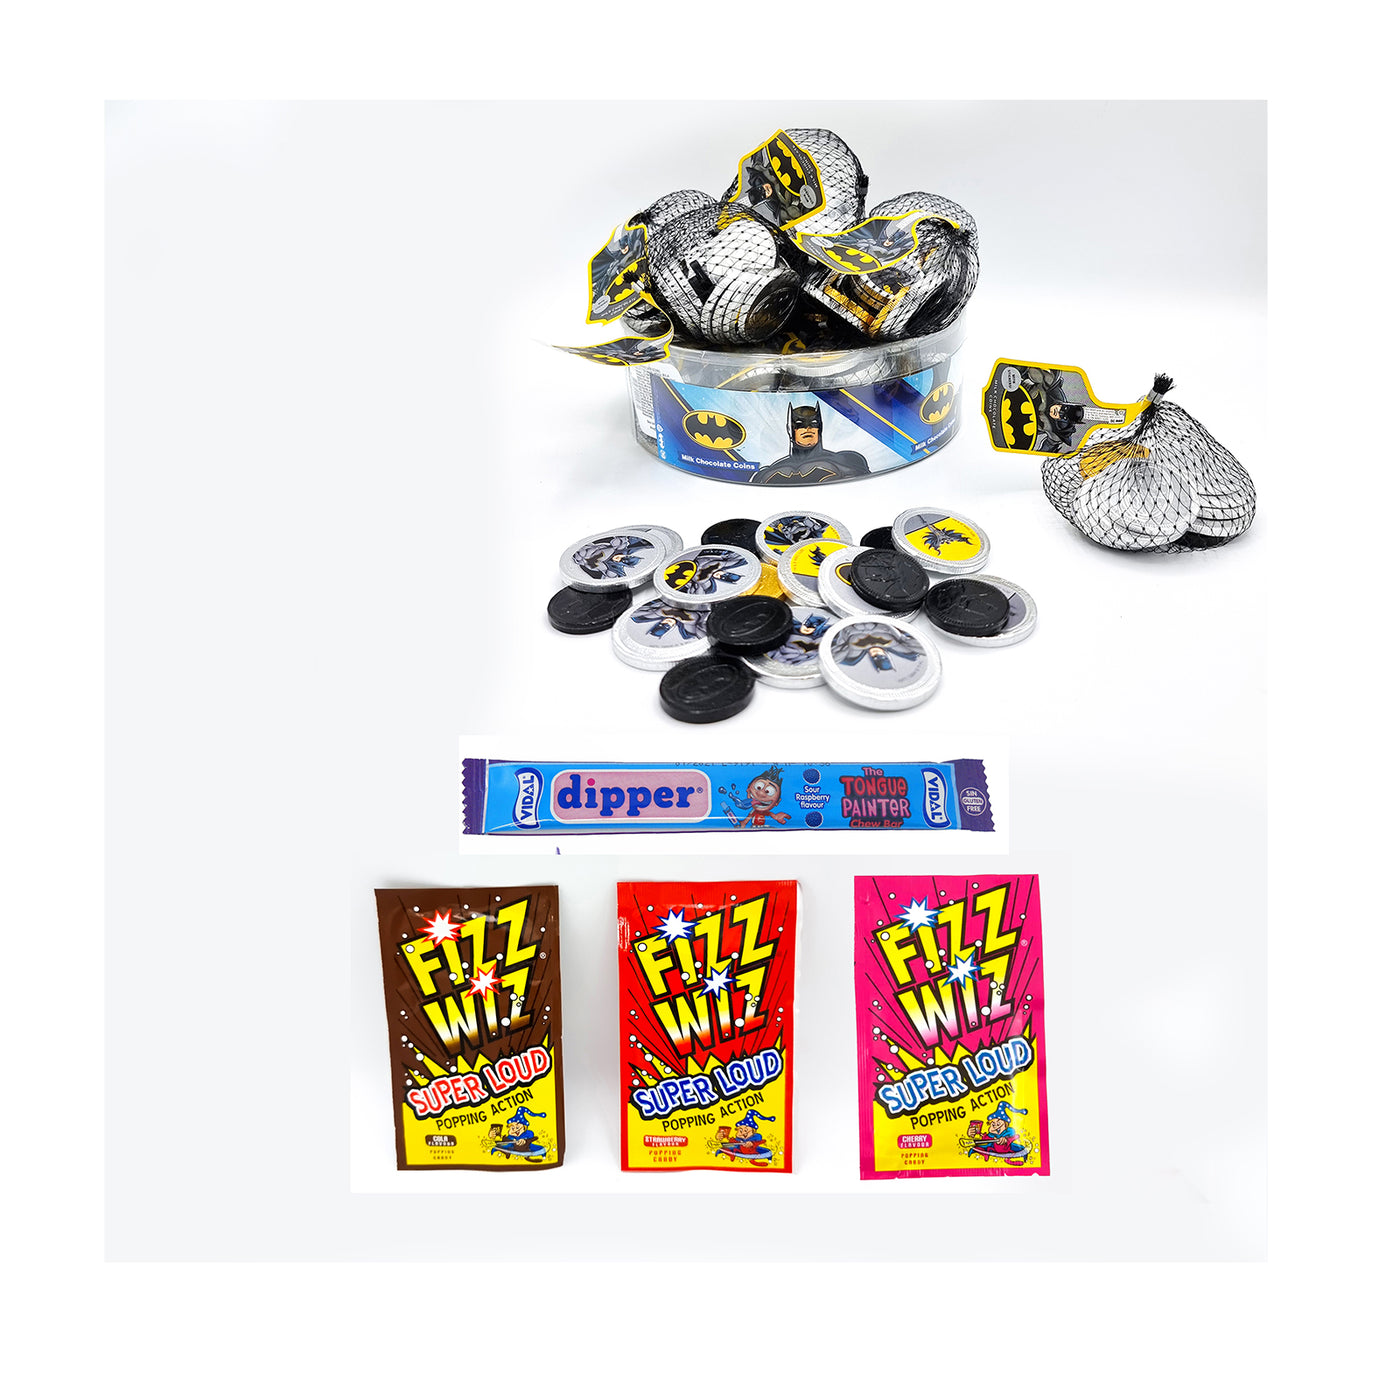 Pre-Filled Boys Superhero Birthday Party Favours With Sweets And Toys.